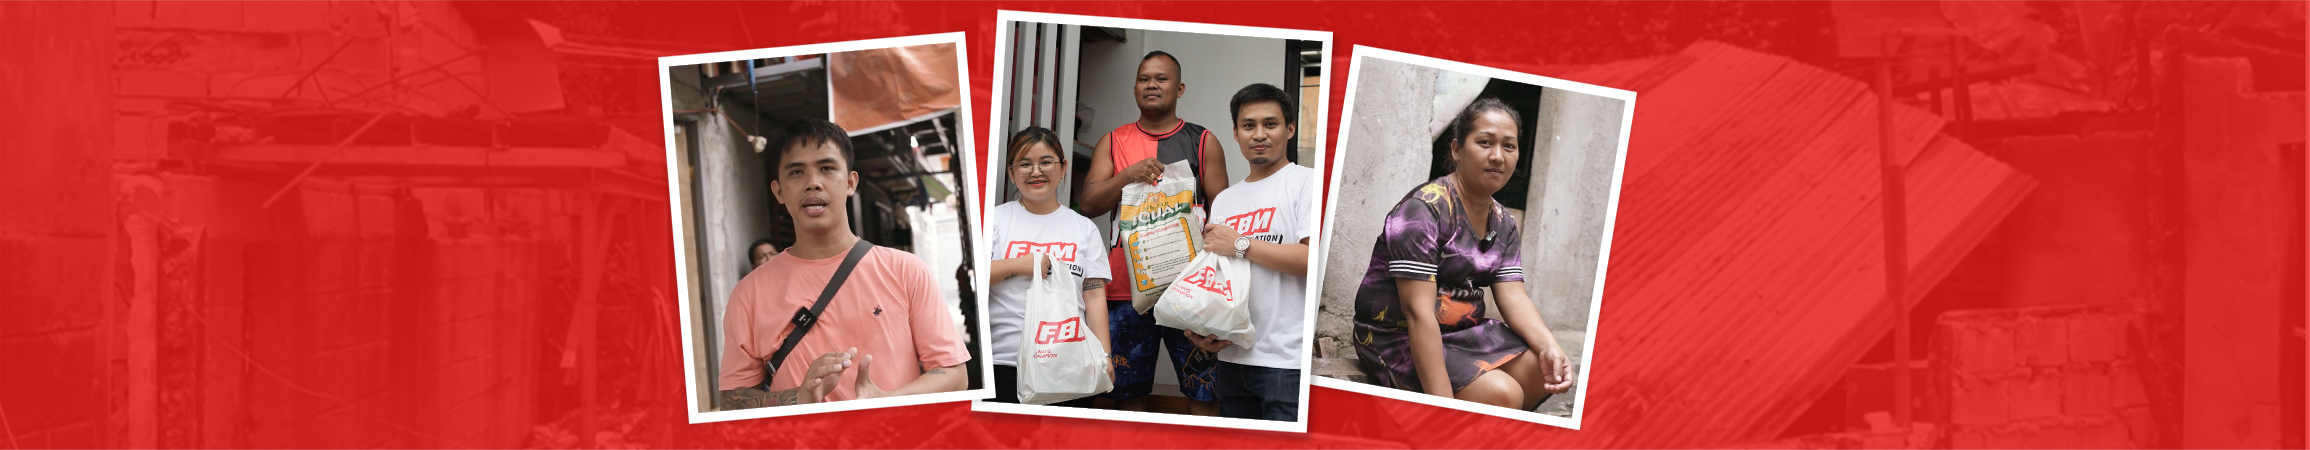 FBM® Foundation revisits Brgy. Old Capitol Site’s solidarity action collecting heartfelt testimonials